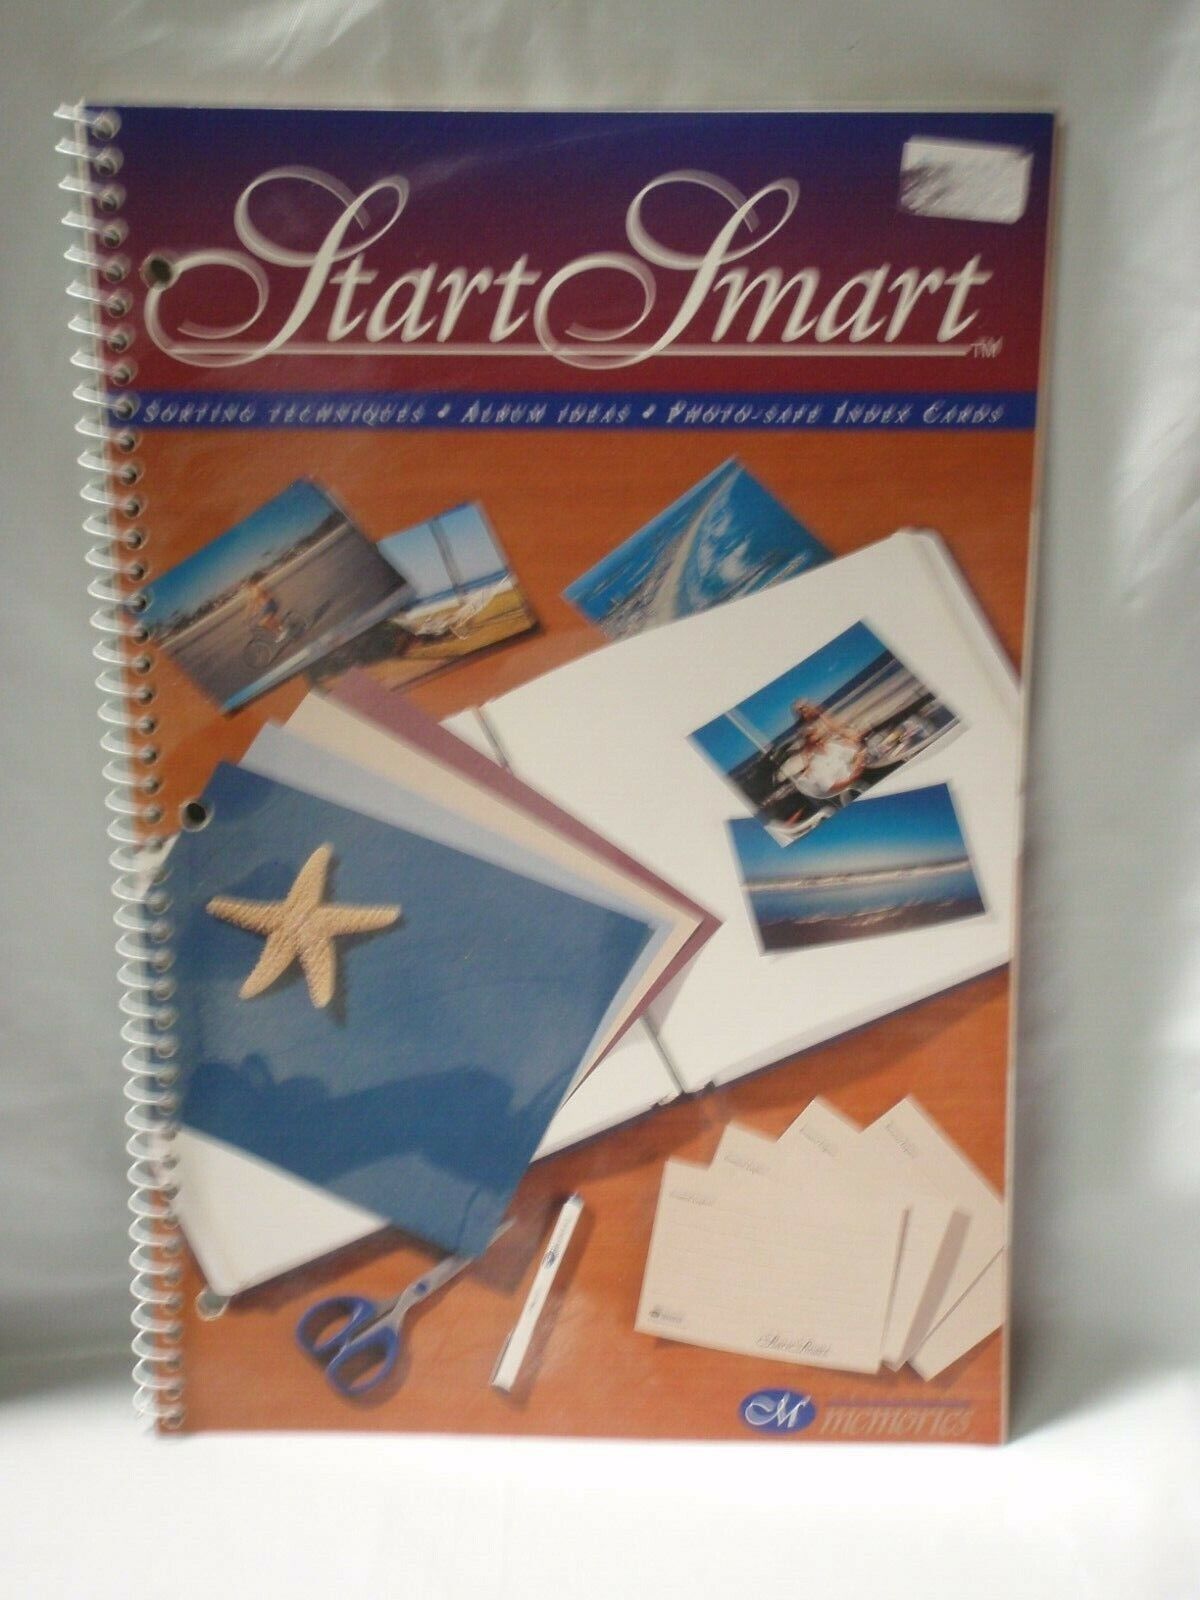 New Creative Memories Start Smart Idea Booklet - 26 Pgs & Organizing Index Cards